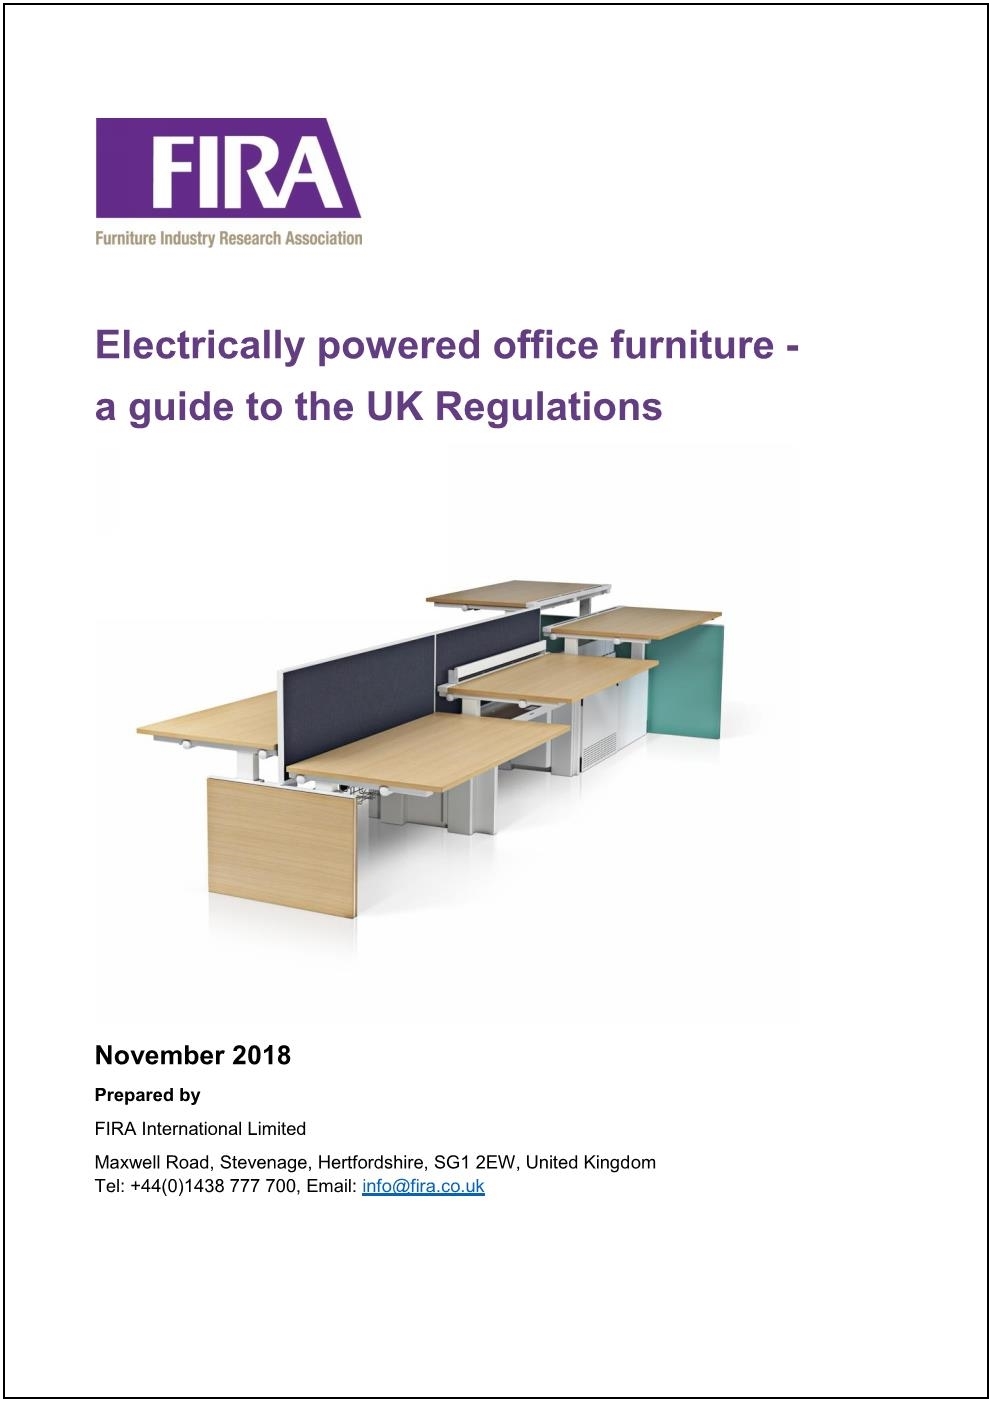 FIRA-Guide-to-Electrically-Powered-Office-Furniture-cover_181213_083052.jpg#asset:325608